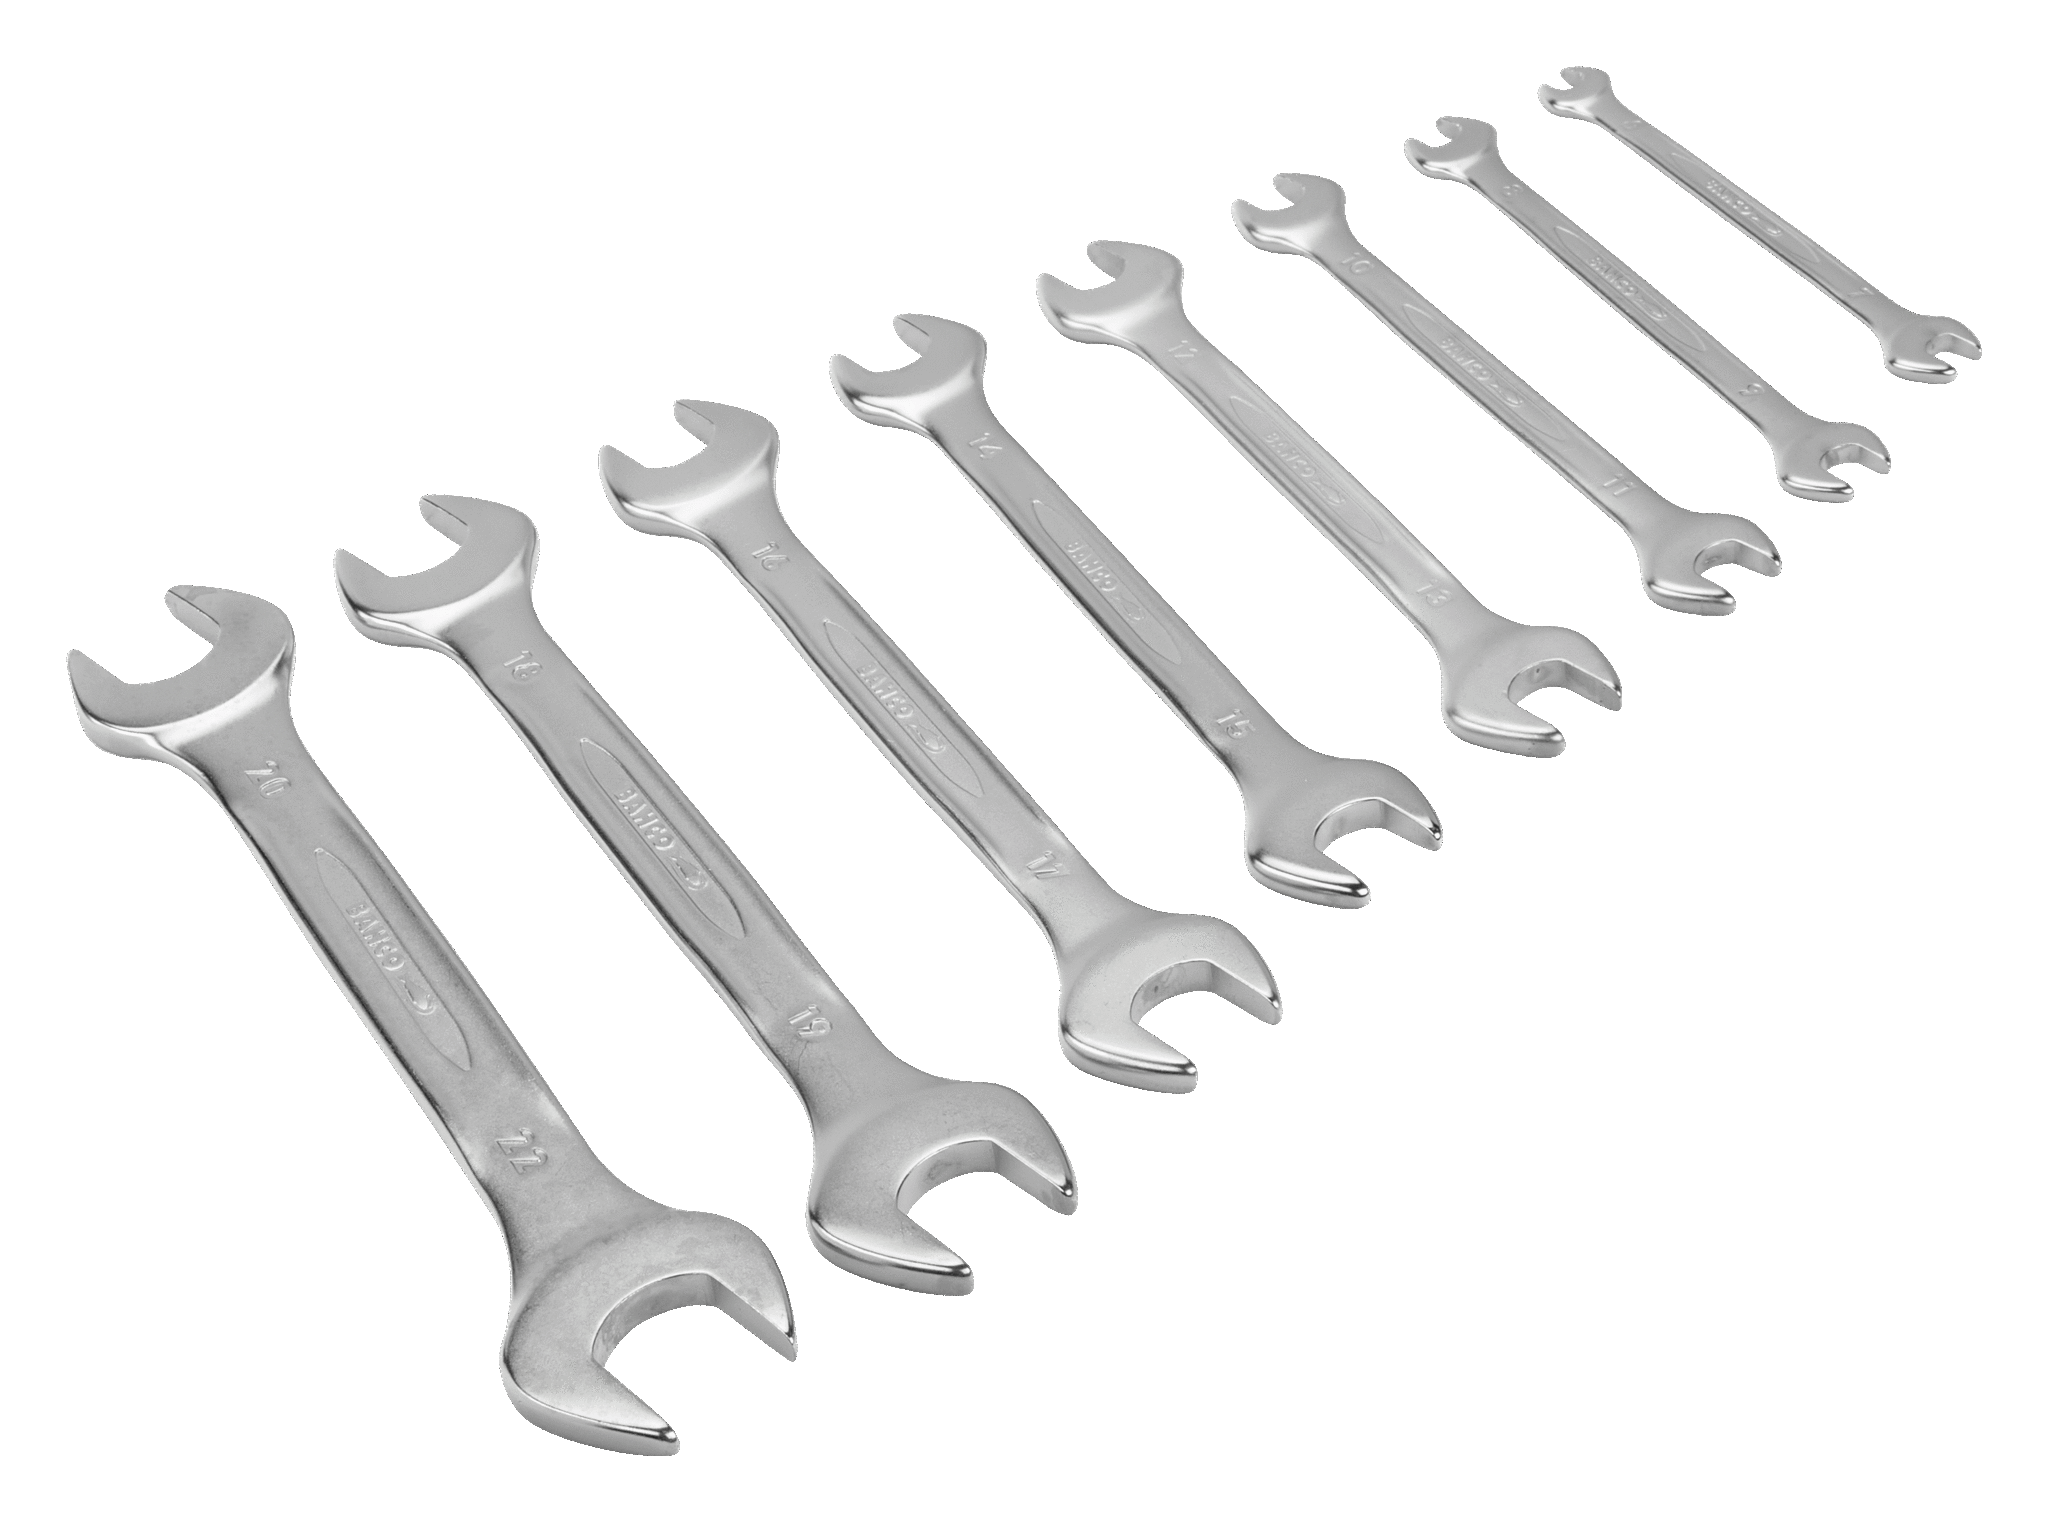 Metric Double Open-Ended Short Shaft Spanner Wrenches 